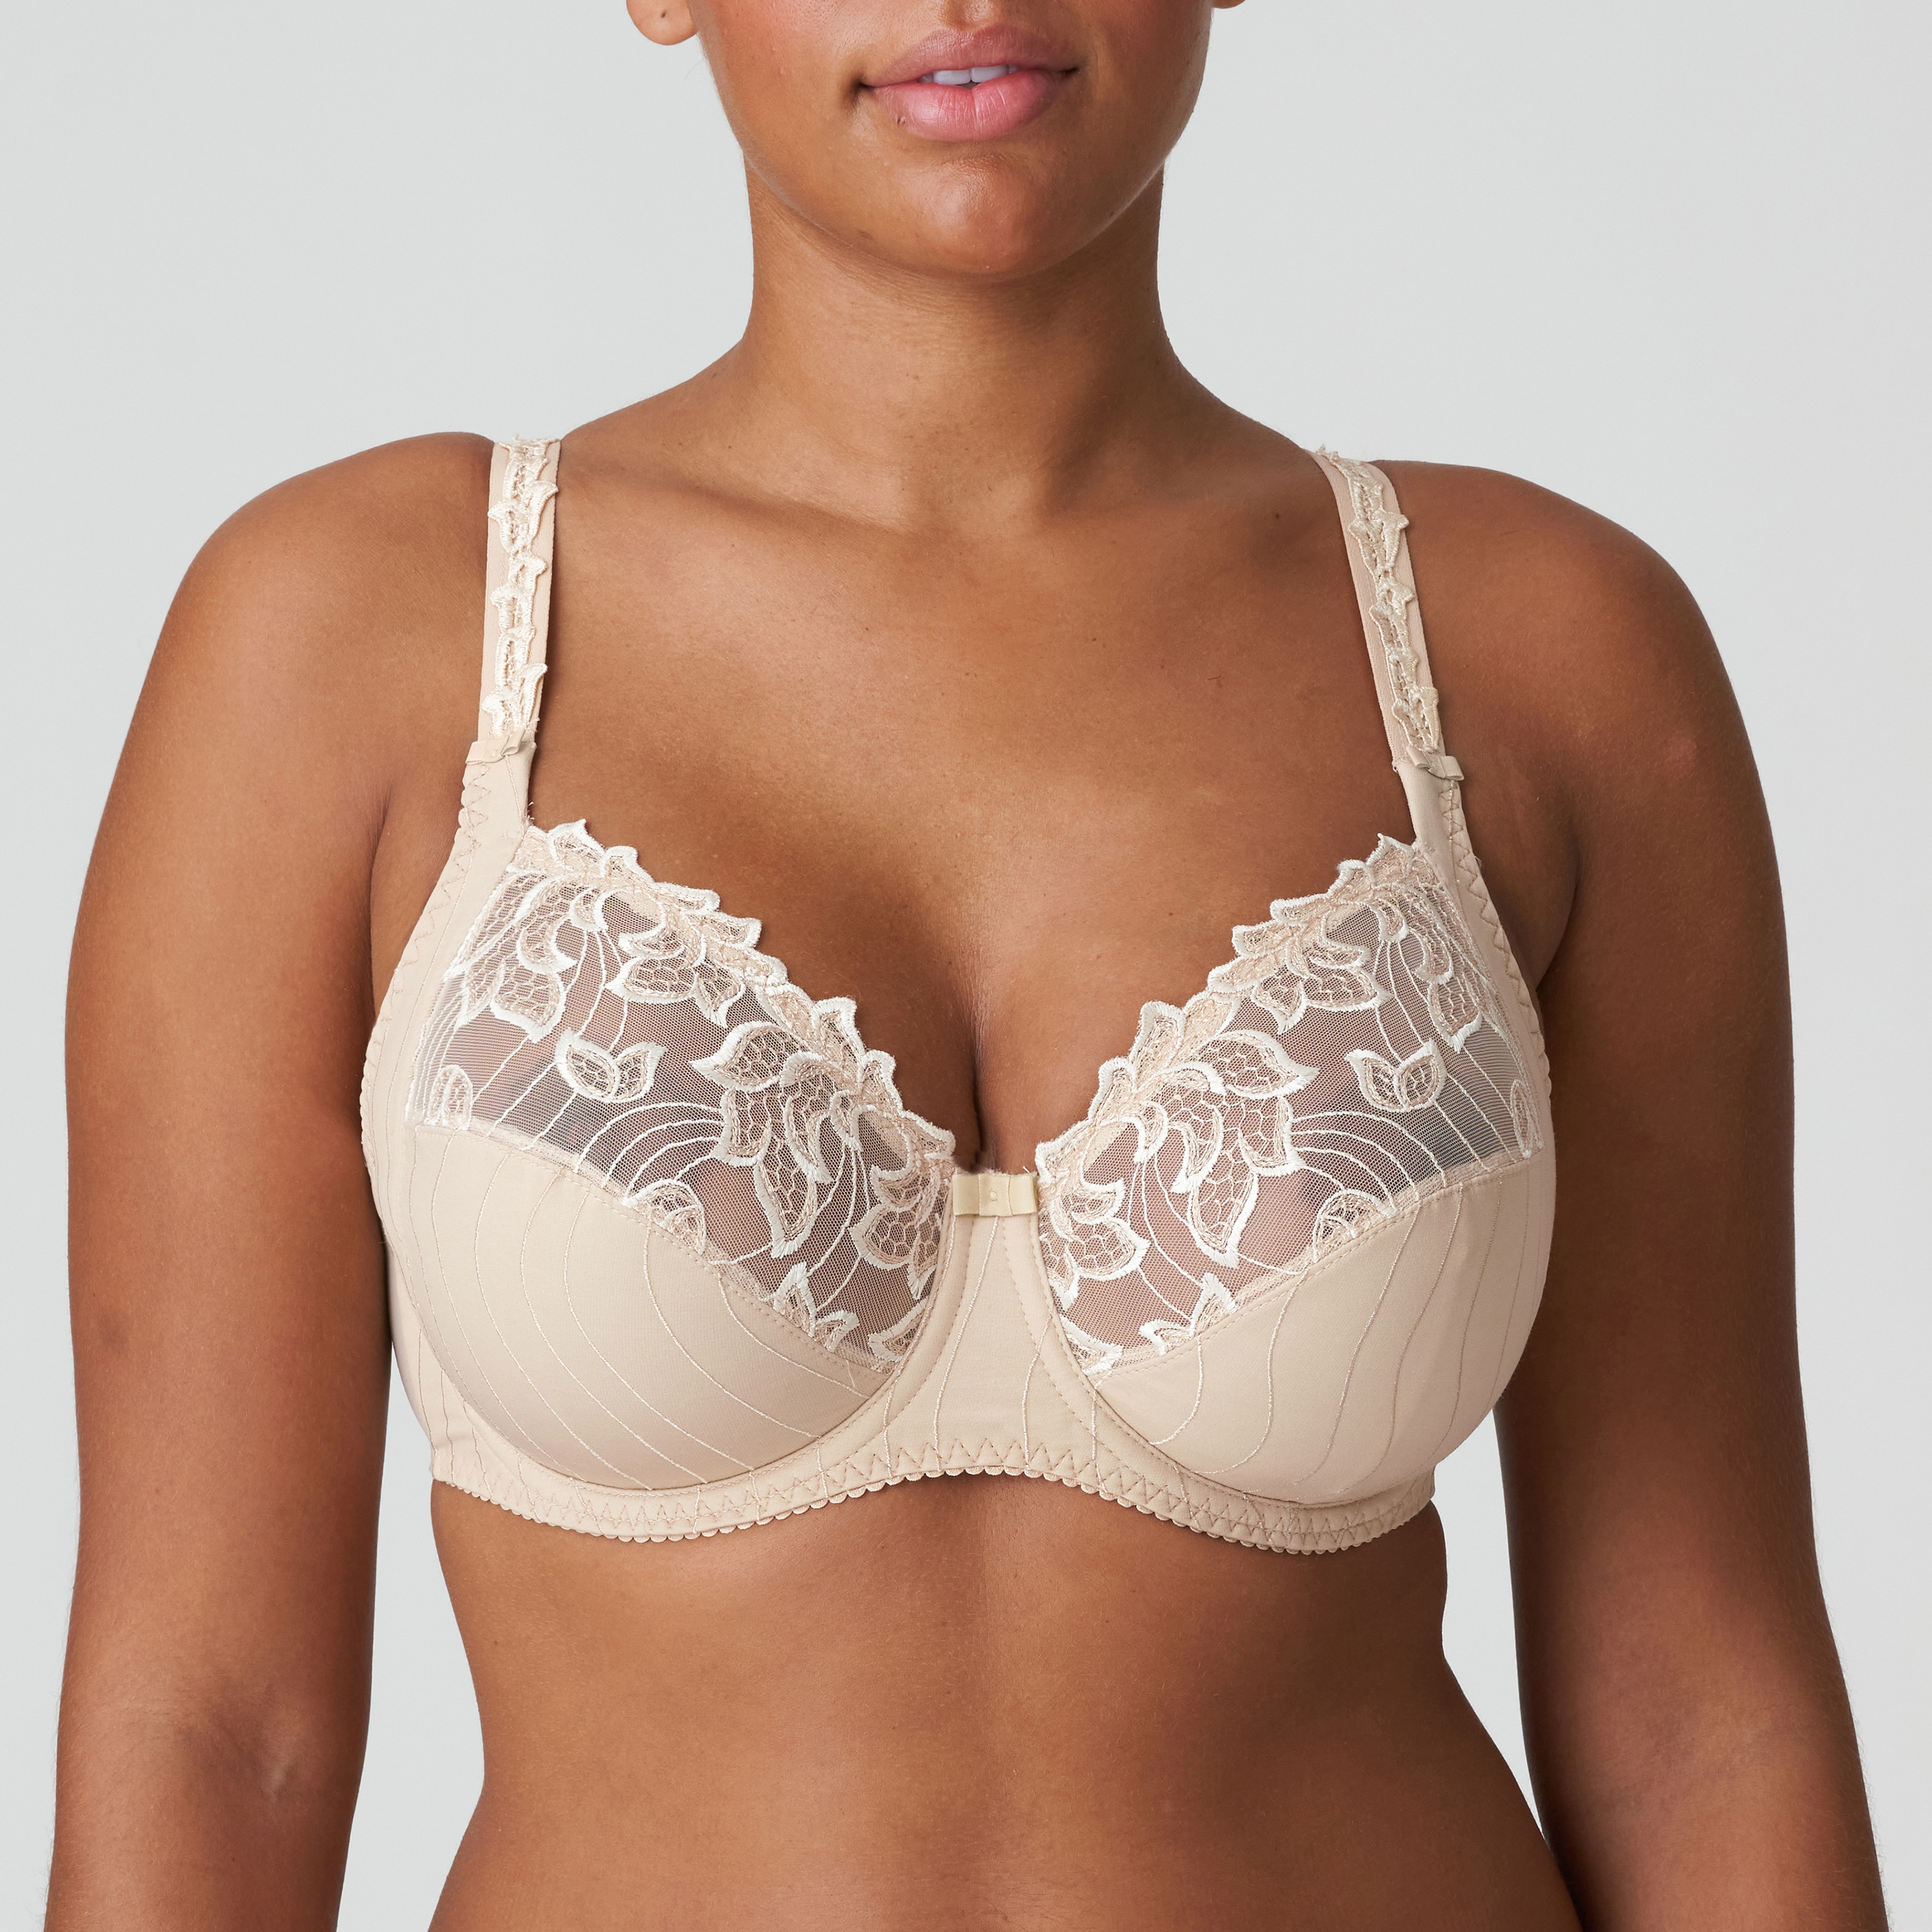 PrimaDonna Deauville 0161815 Women's Natural Wired Full Cup Bra